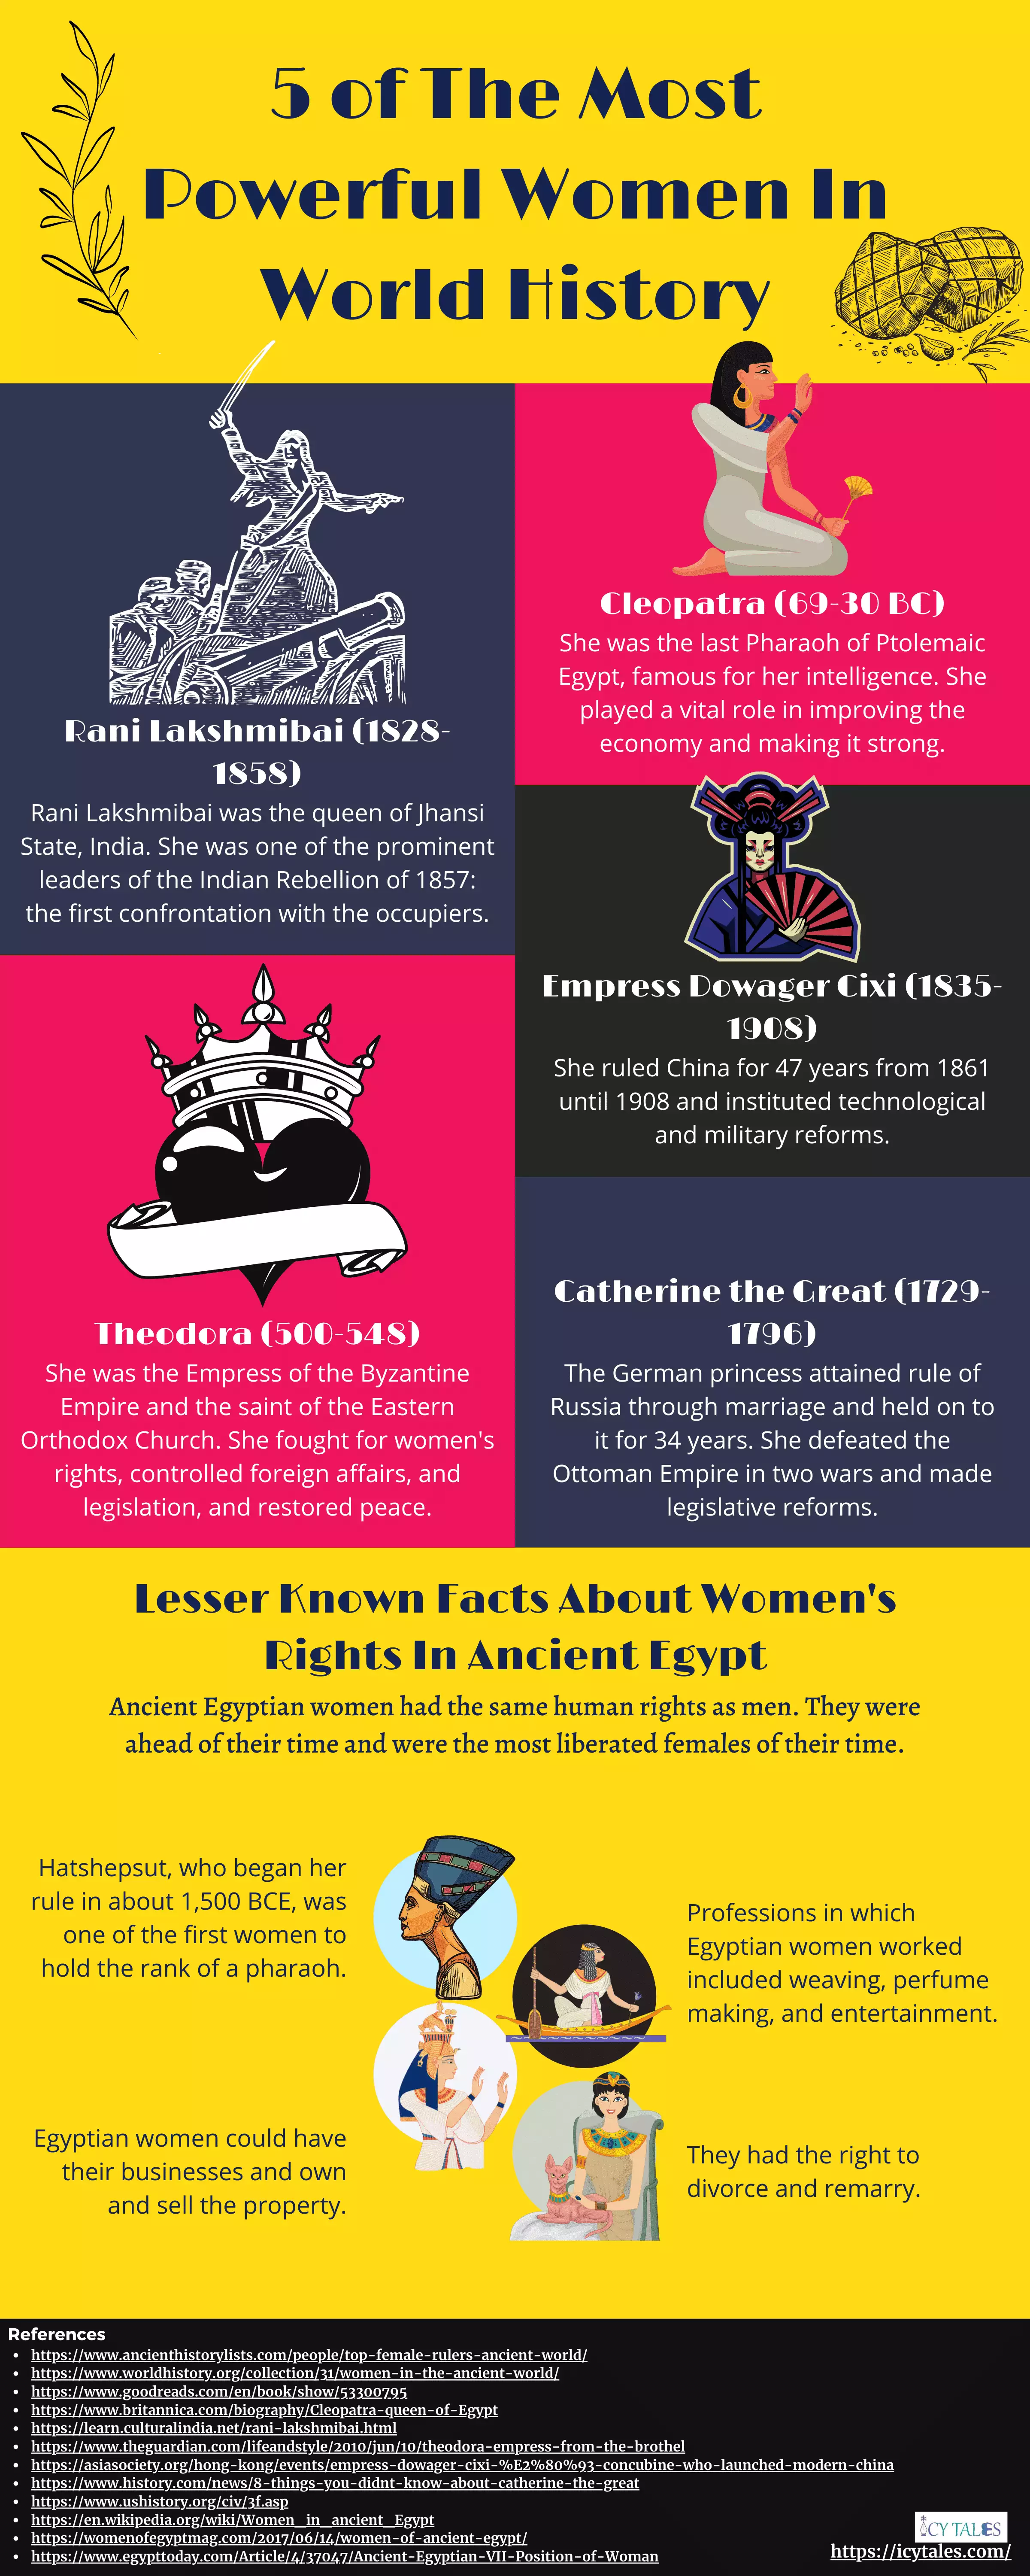 Infographic That Discusses 5 of The Most Powerful Women In World History